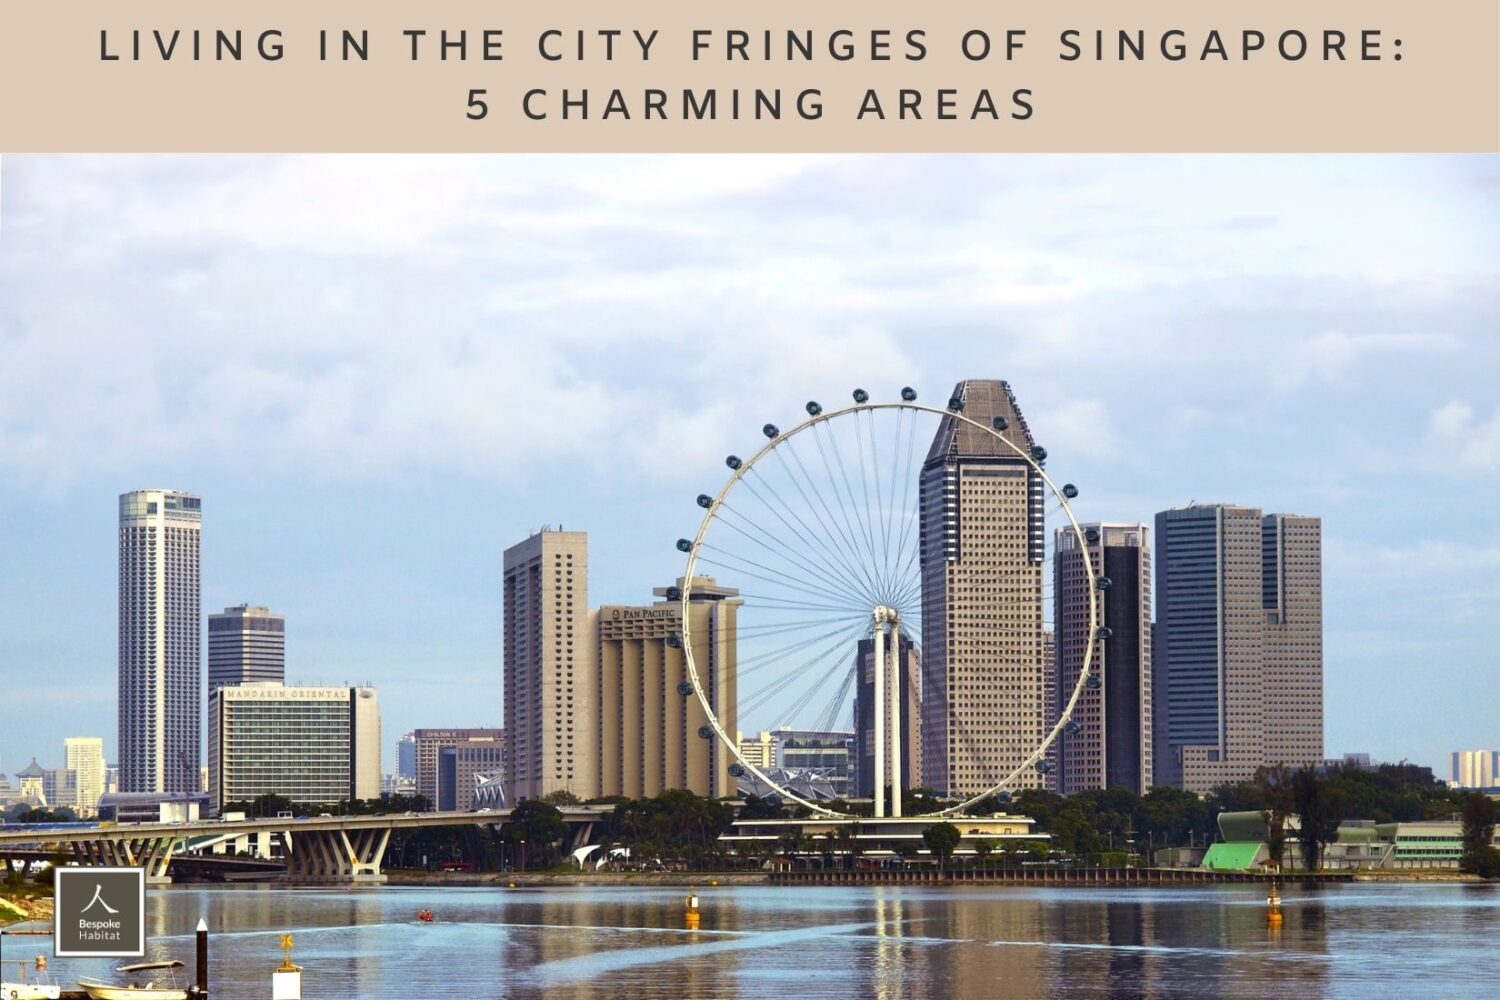 Living in city fringes of Singapore 5 charming areas